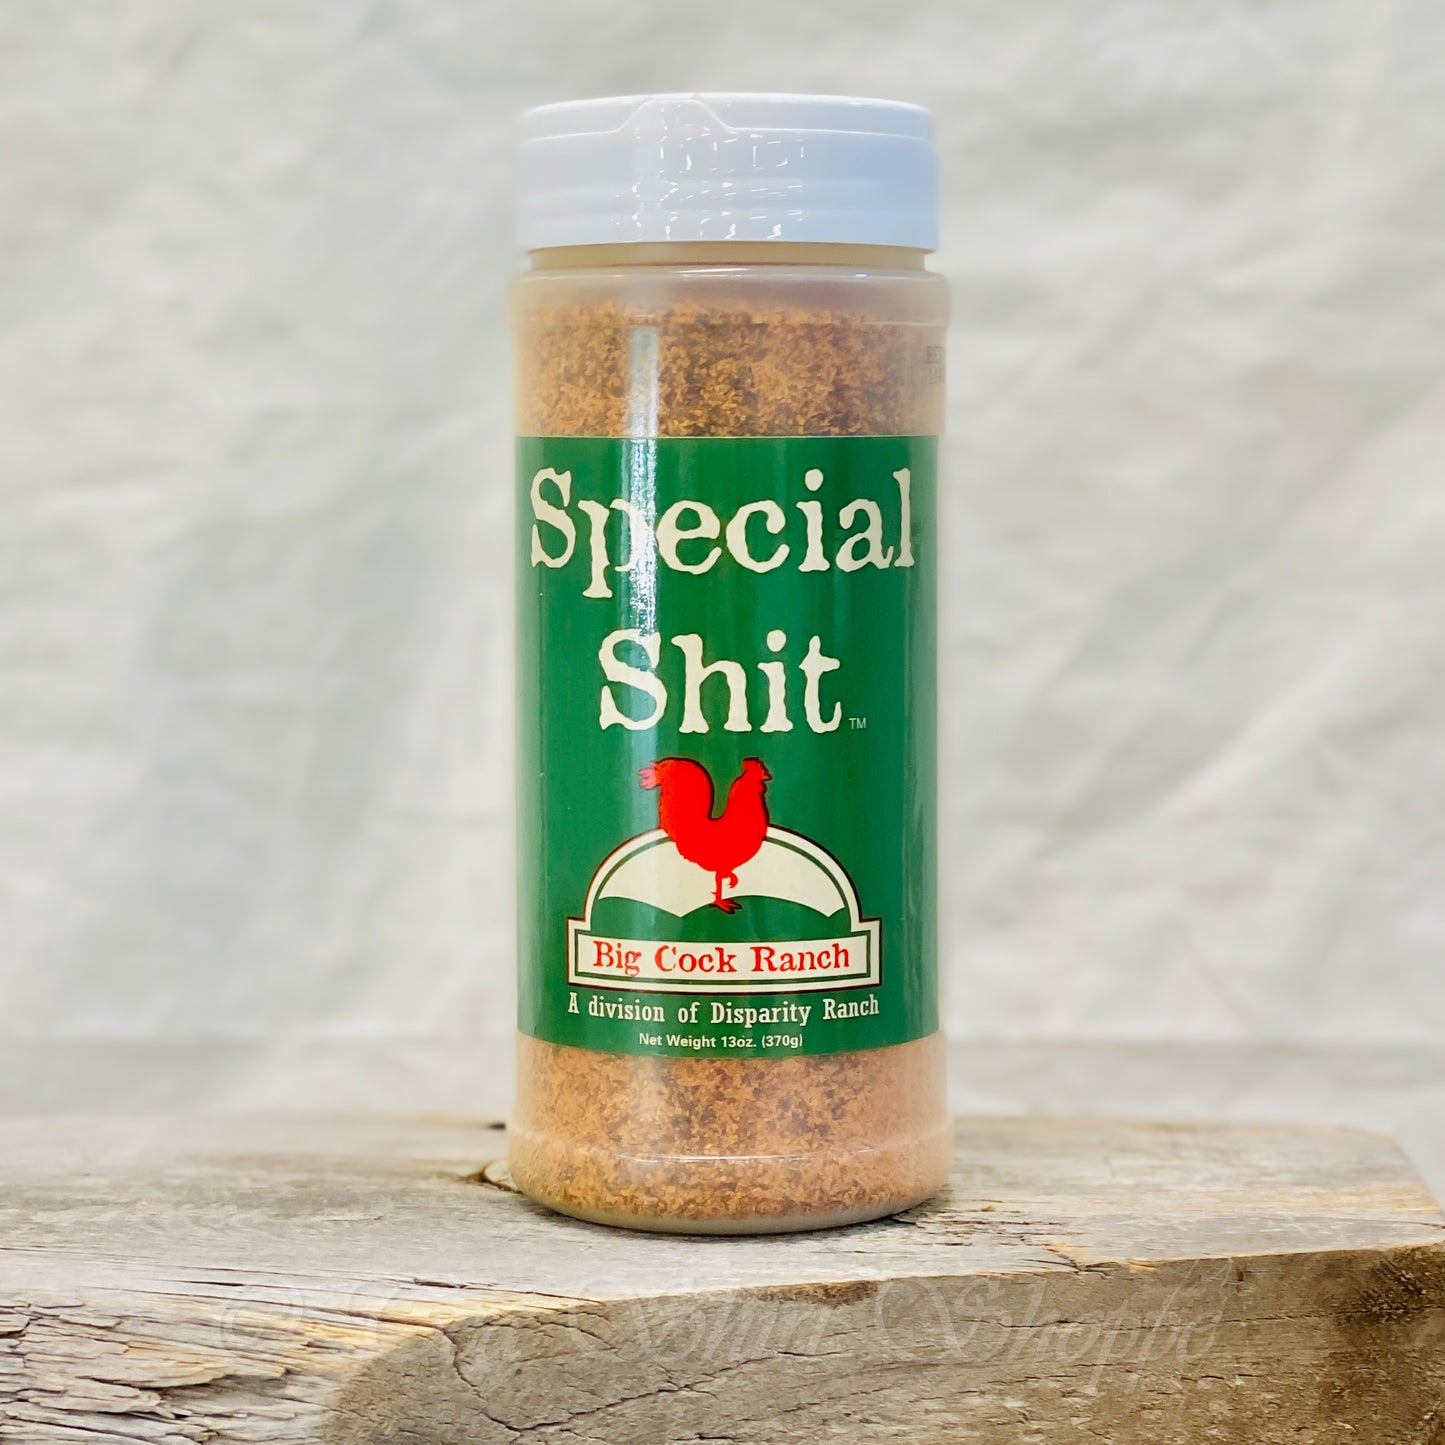 Ingredients:  Salt, Pepper, Granulated Garlic, Paprika, Sugar, Granulated Onion, Chilli Powder, Plain Meat Tenderizer, Calcium Stearate.  Gluten-free, and absolutely NO MSG!  13oz